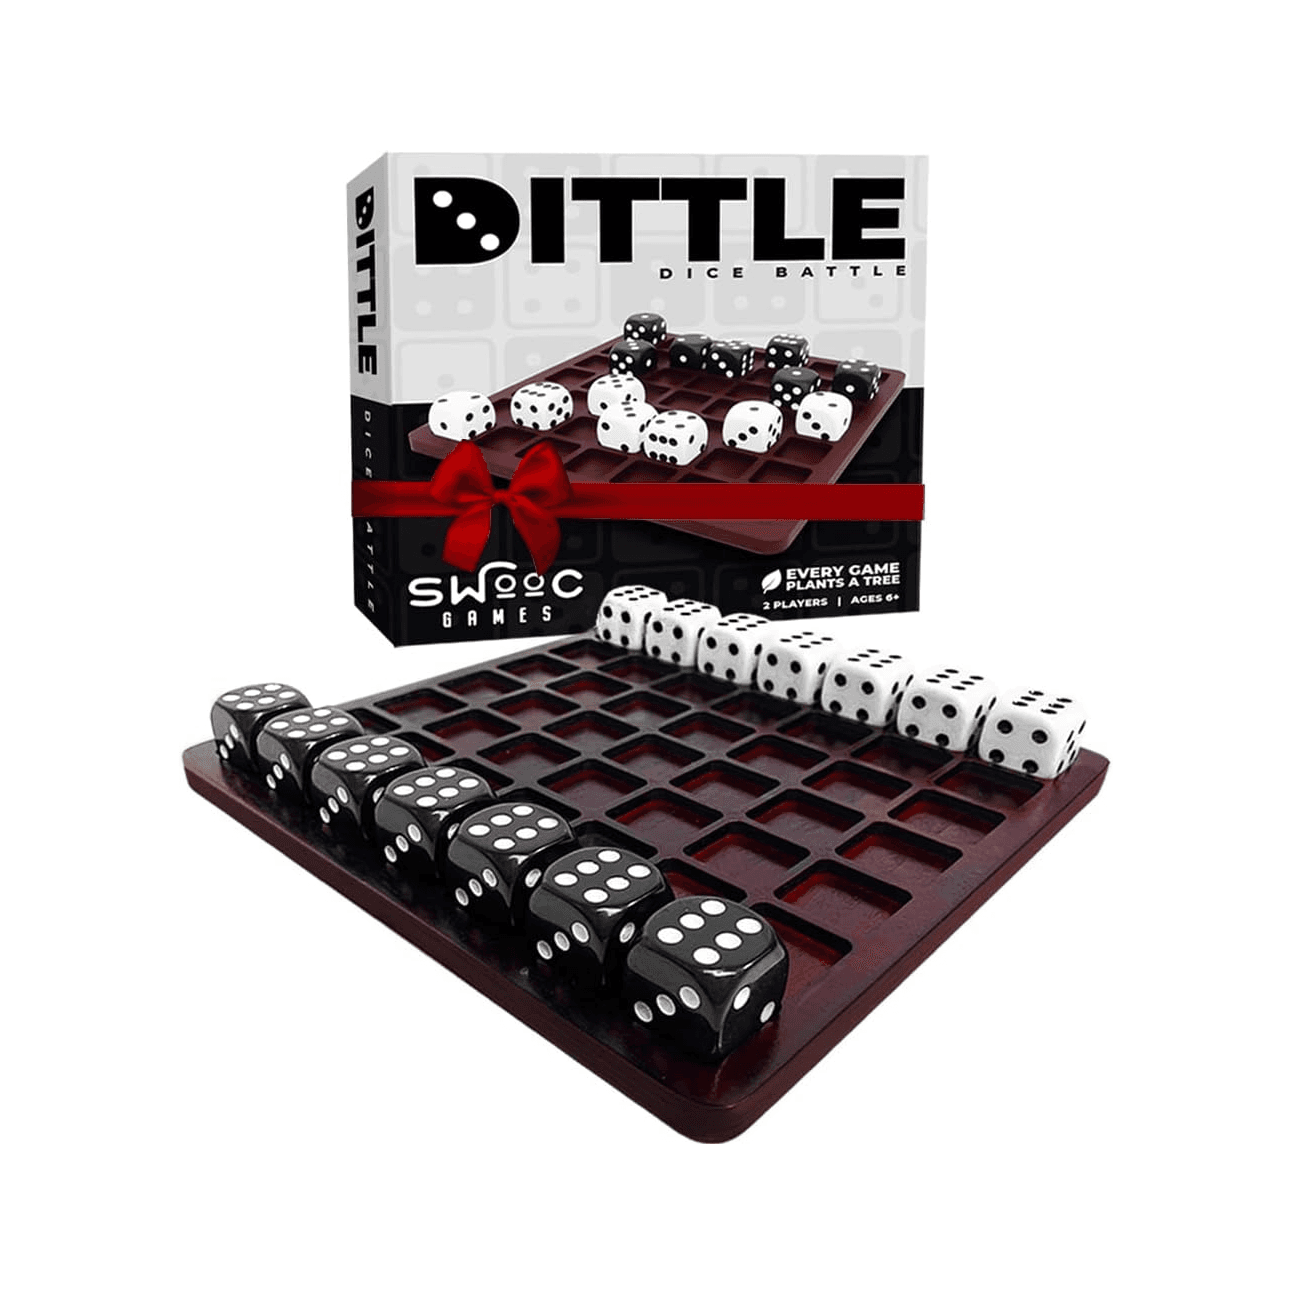 Montessori SWOOC Games Dittle Wooden Dice Battle Games